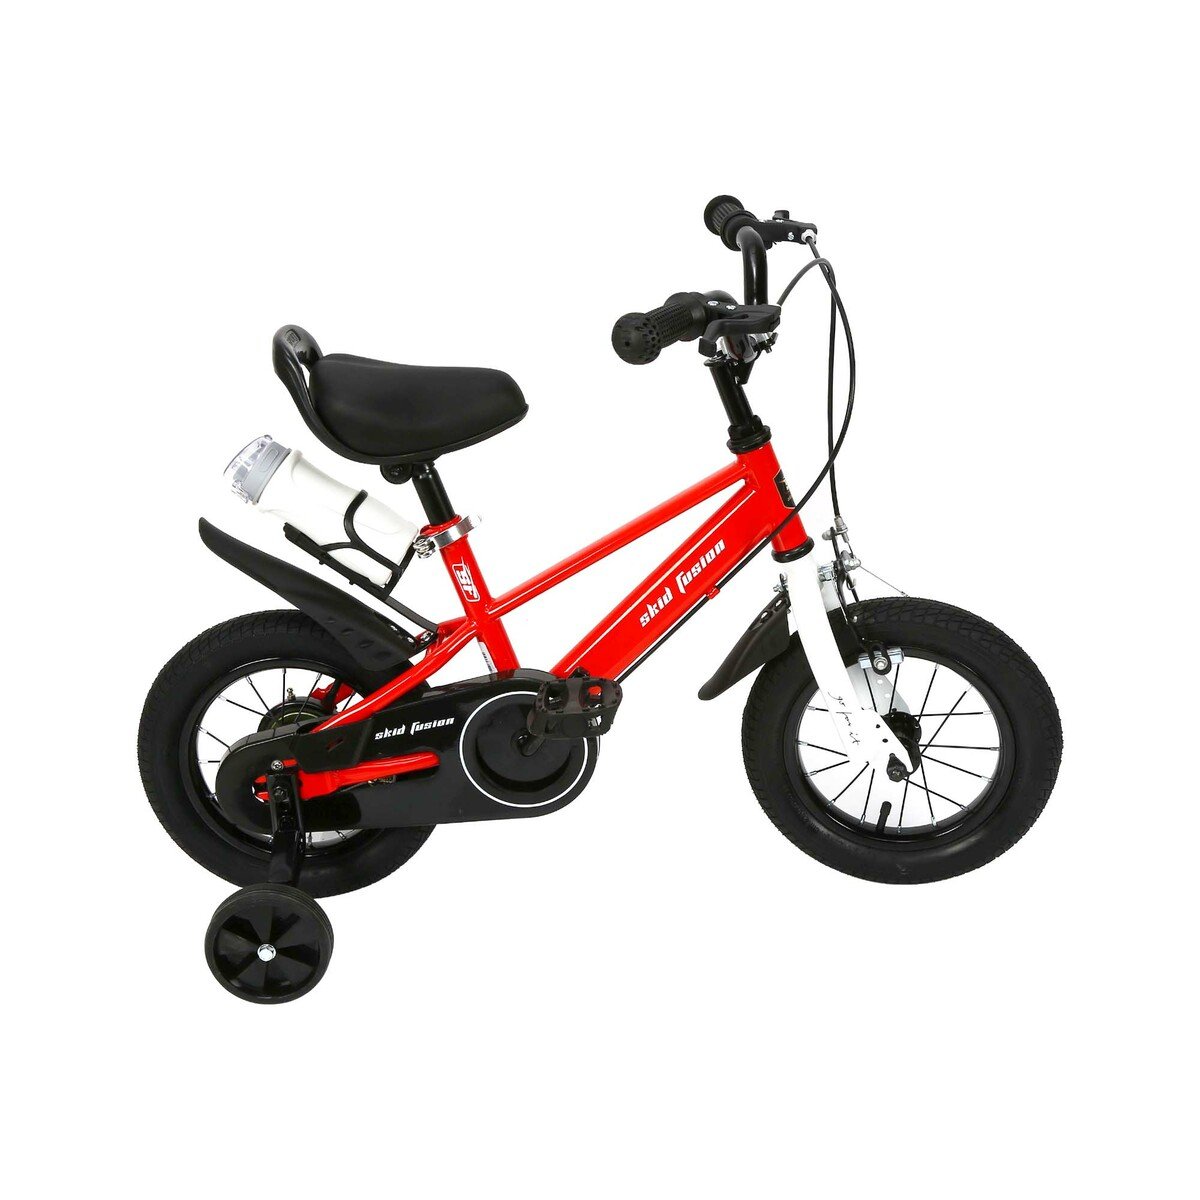 Skid Fusion Kids Bicycle 12" CYCLE SF Assorted Color